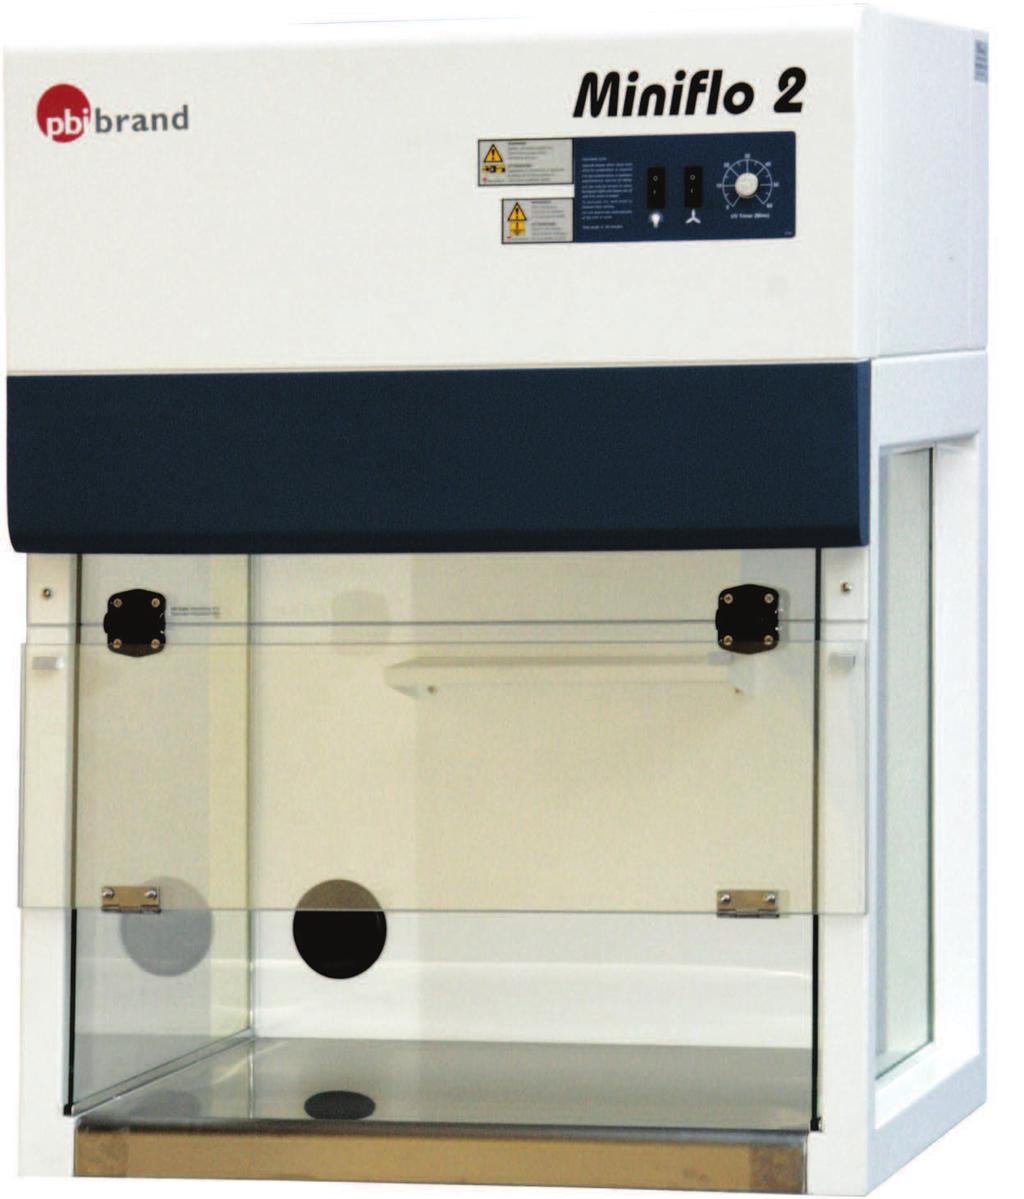 MINIFLO DUE - TYPE 60 COMPACT VERTICAL LAMINAR FLOW CABINET DESIGNED FOR MICROBIOLOGICAL AND PCR PROCEDURES A very compact size (footprint 73x61 cm), for small laboratory or dedicated product